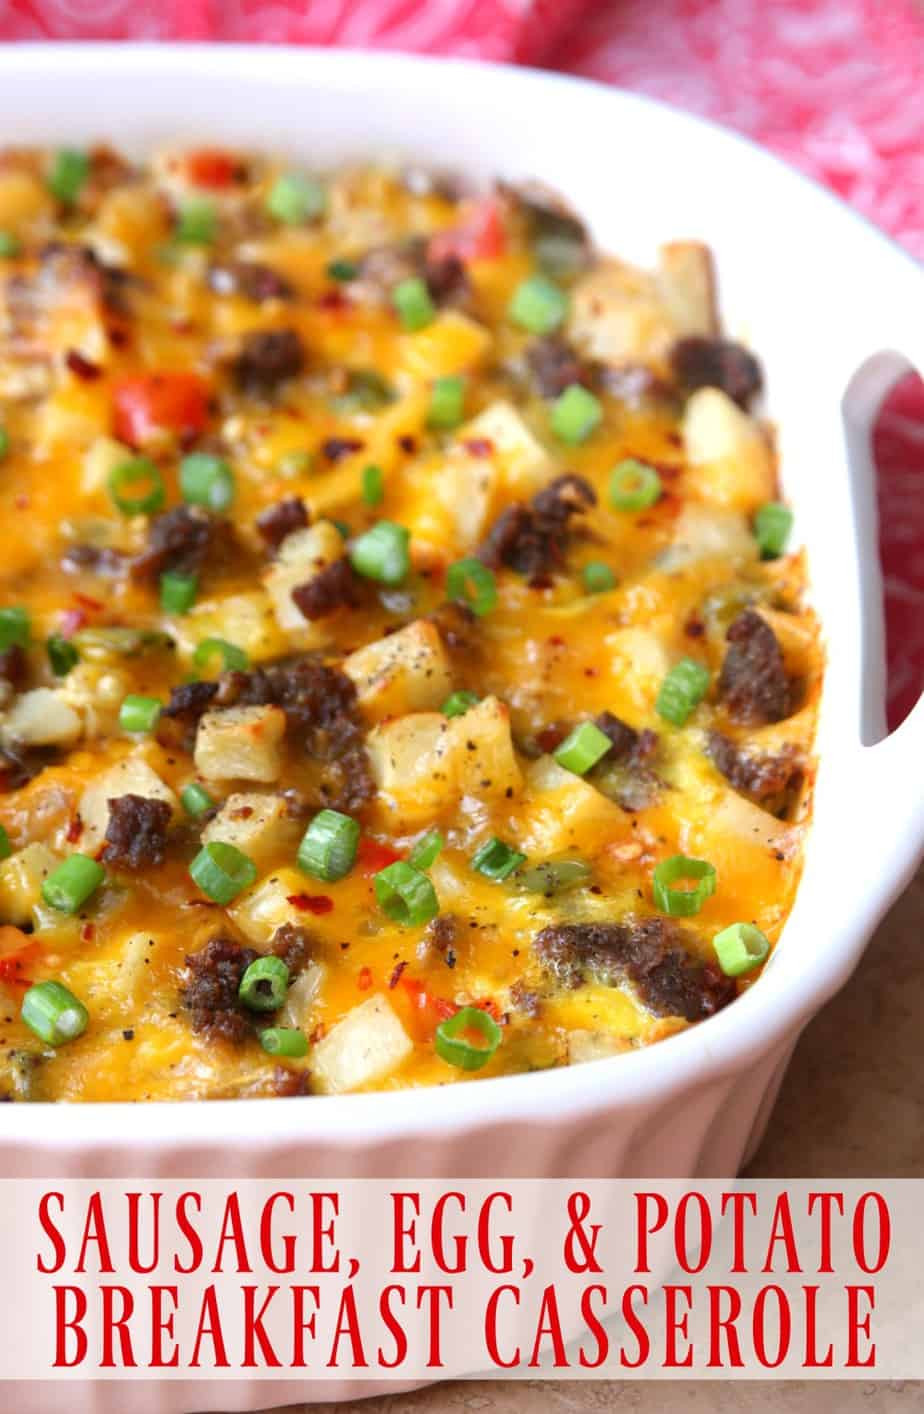 Sausage And Egg Breakfast Casserole Recipe
 The Best Sausage Egg Potato Breakfast Casserole